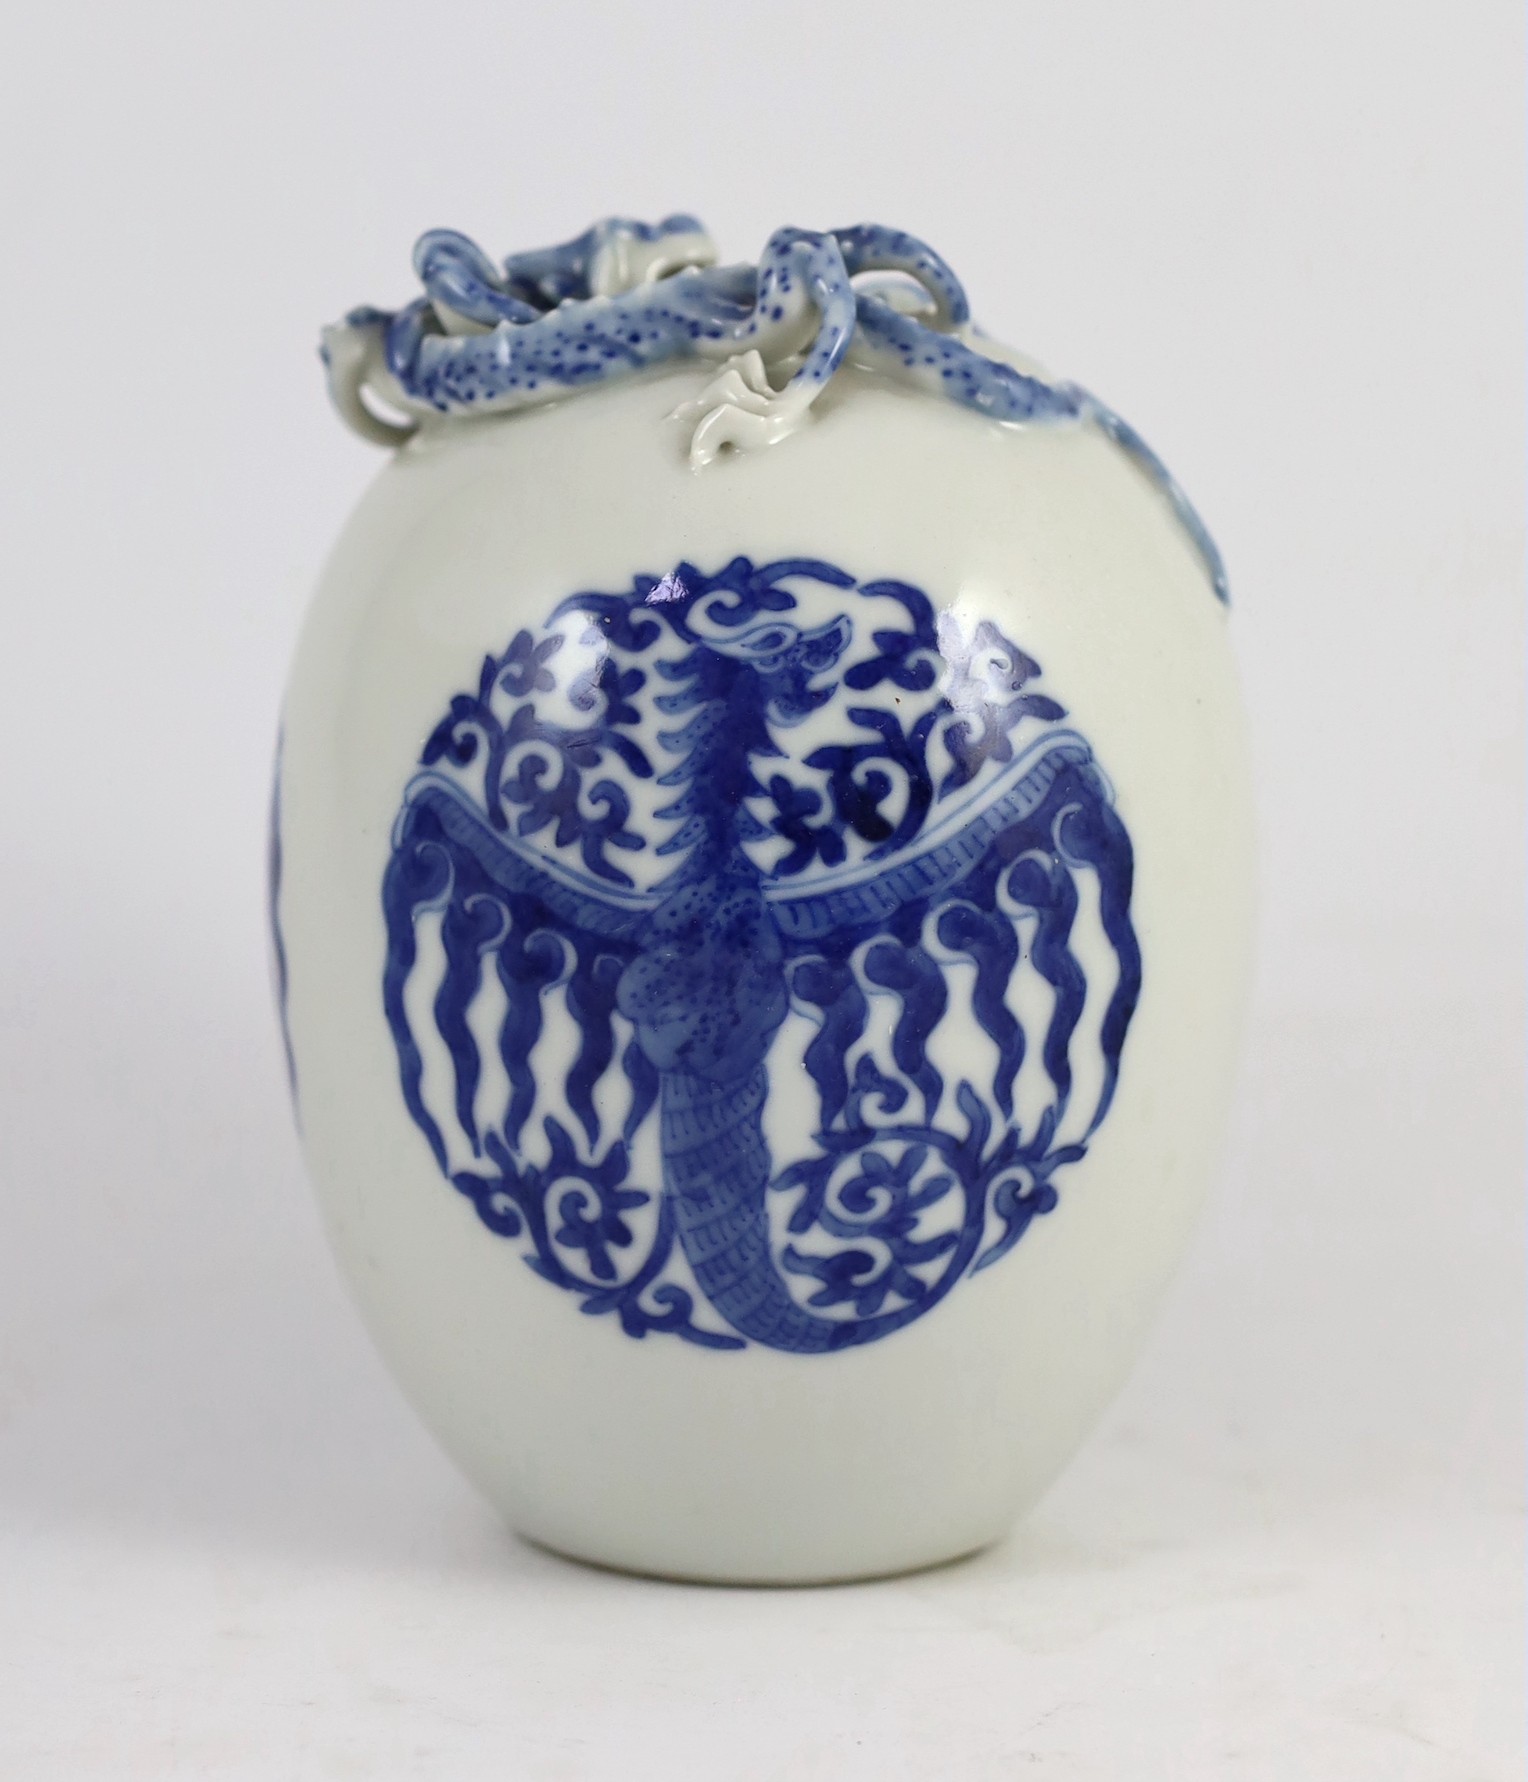 A Chinese ovoid 'dragon' vase, 19th century or later, 17.5cm high